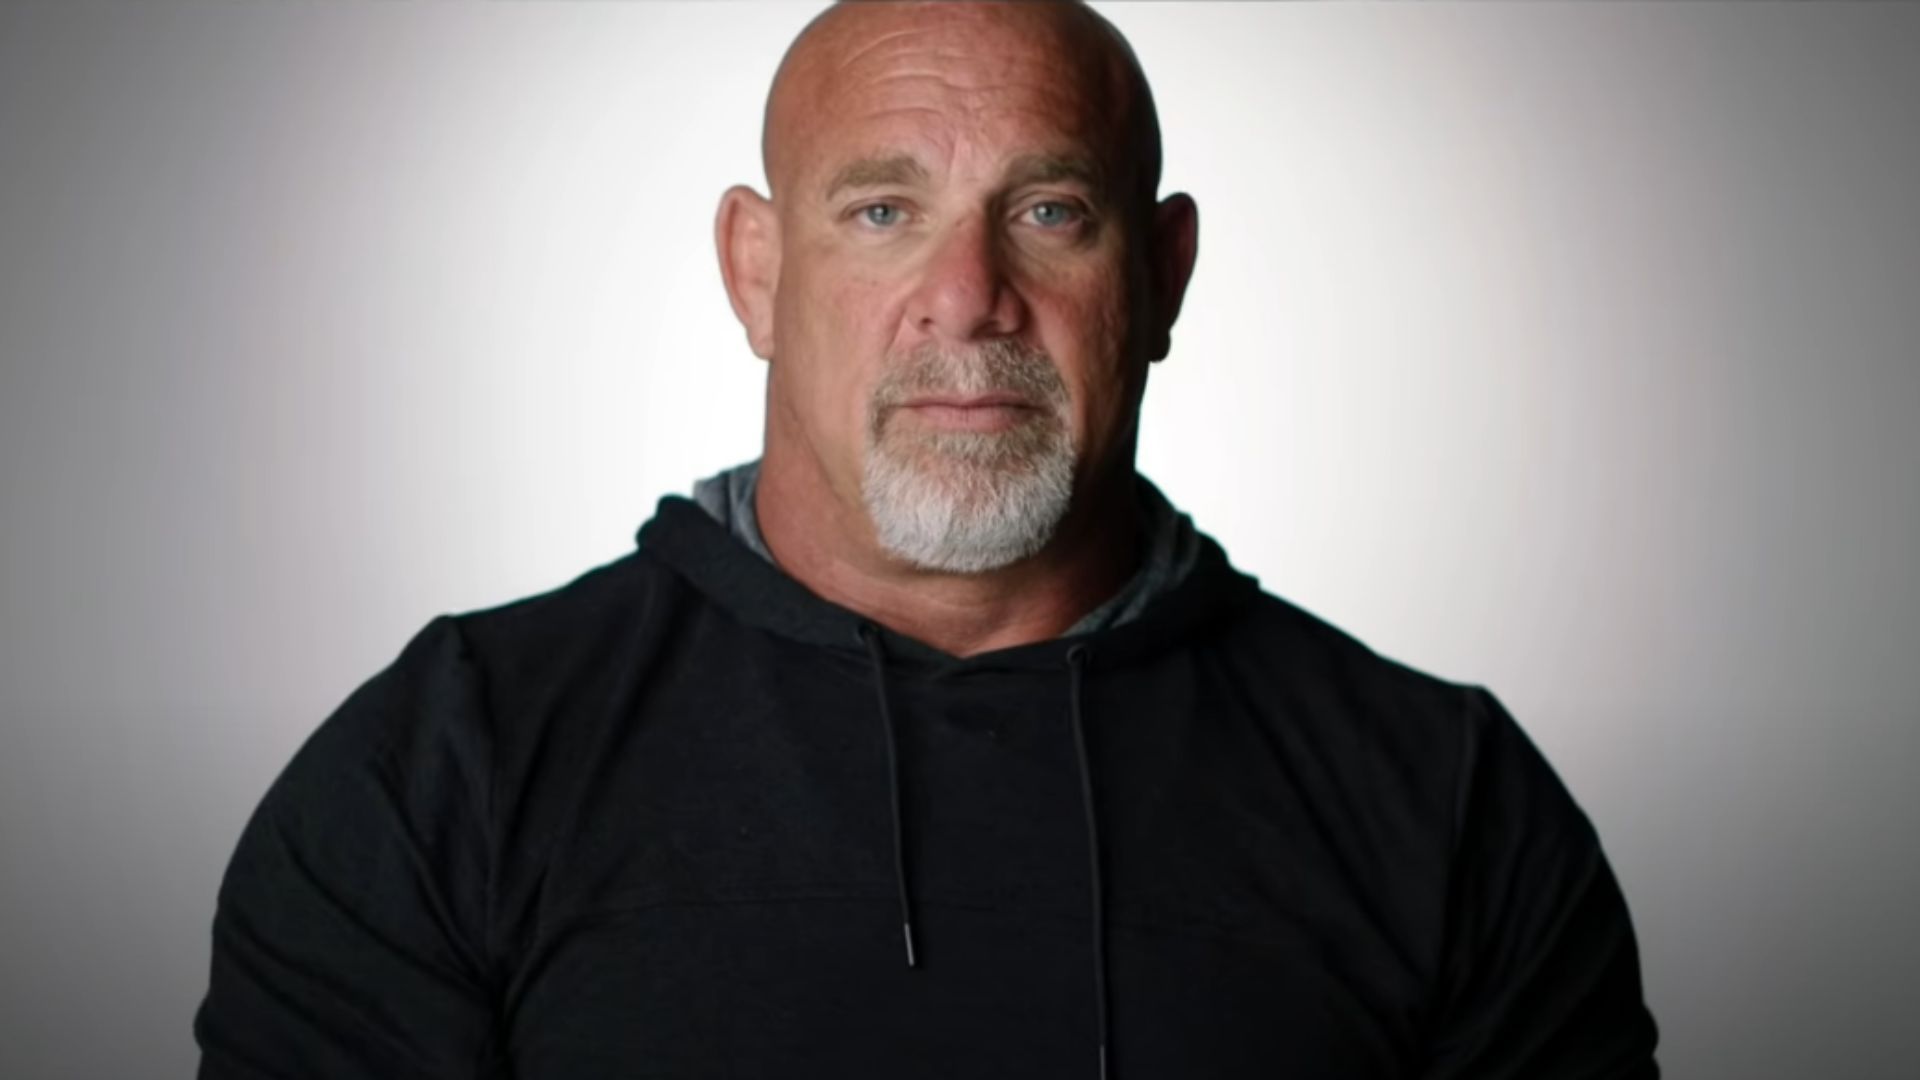 Goldberg joined the WWE Hall of Fame in 2018.